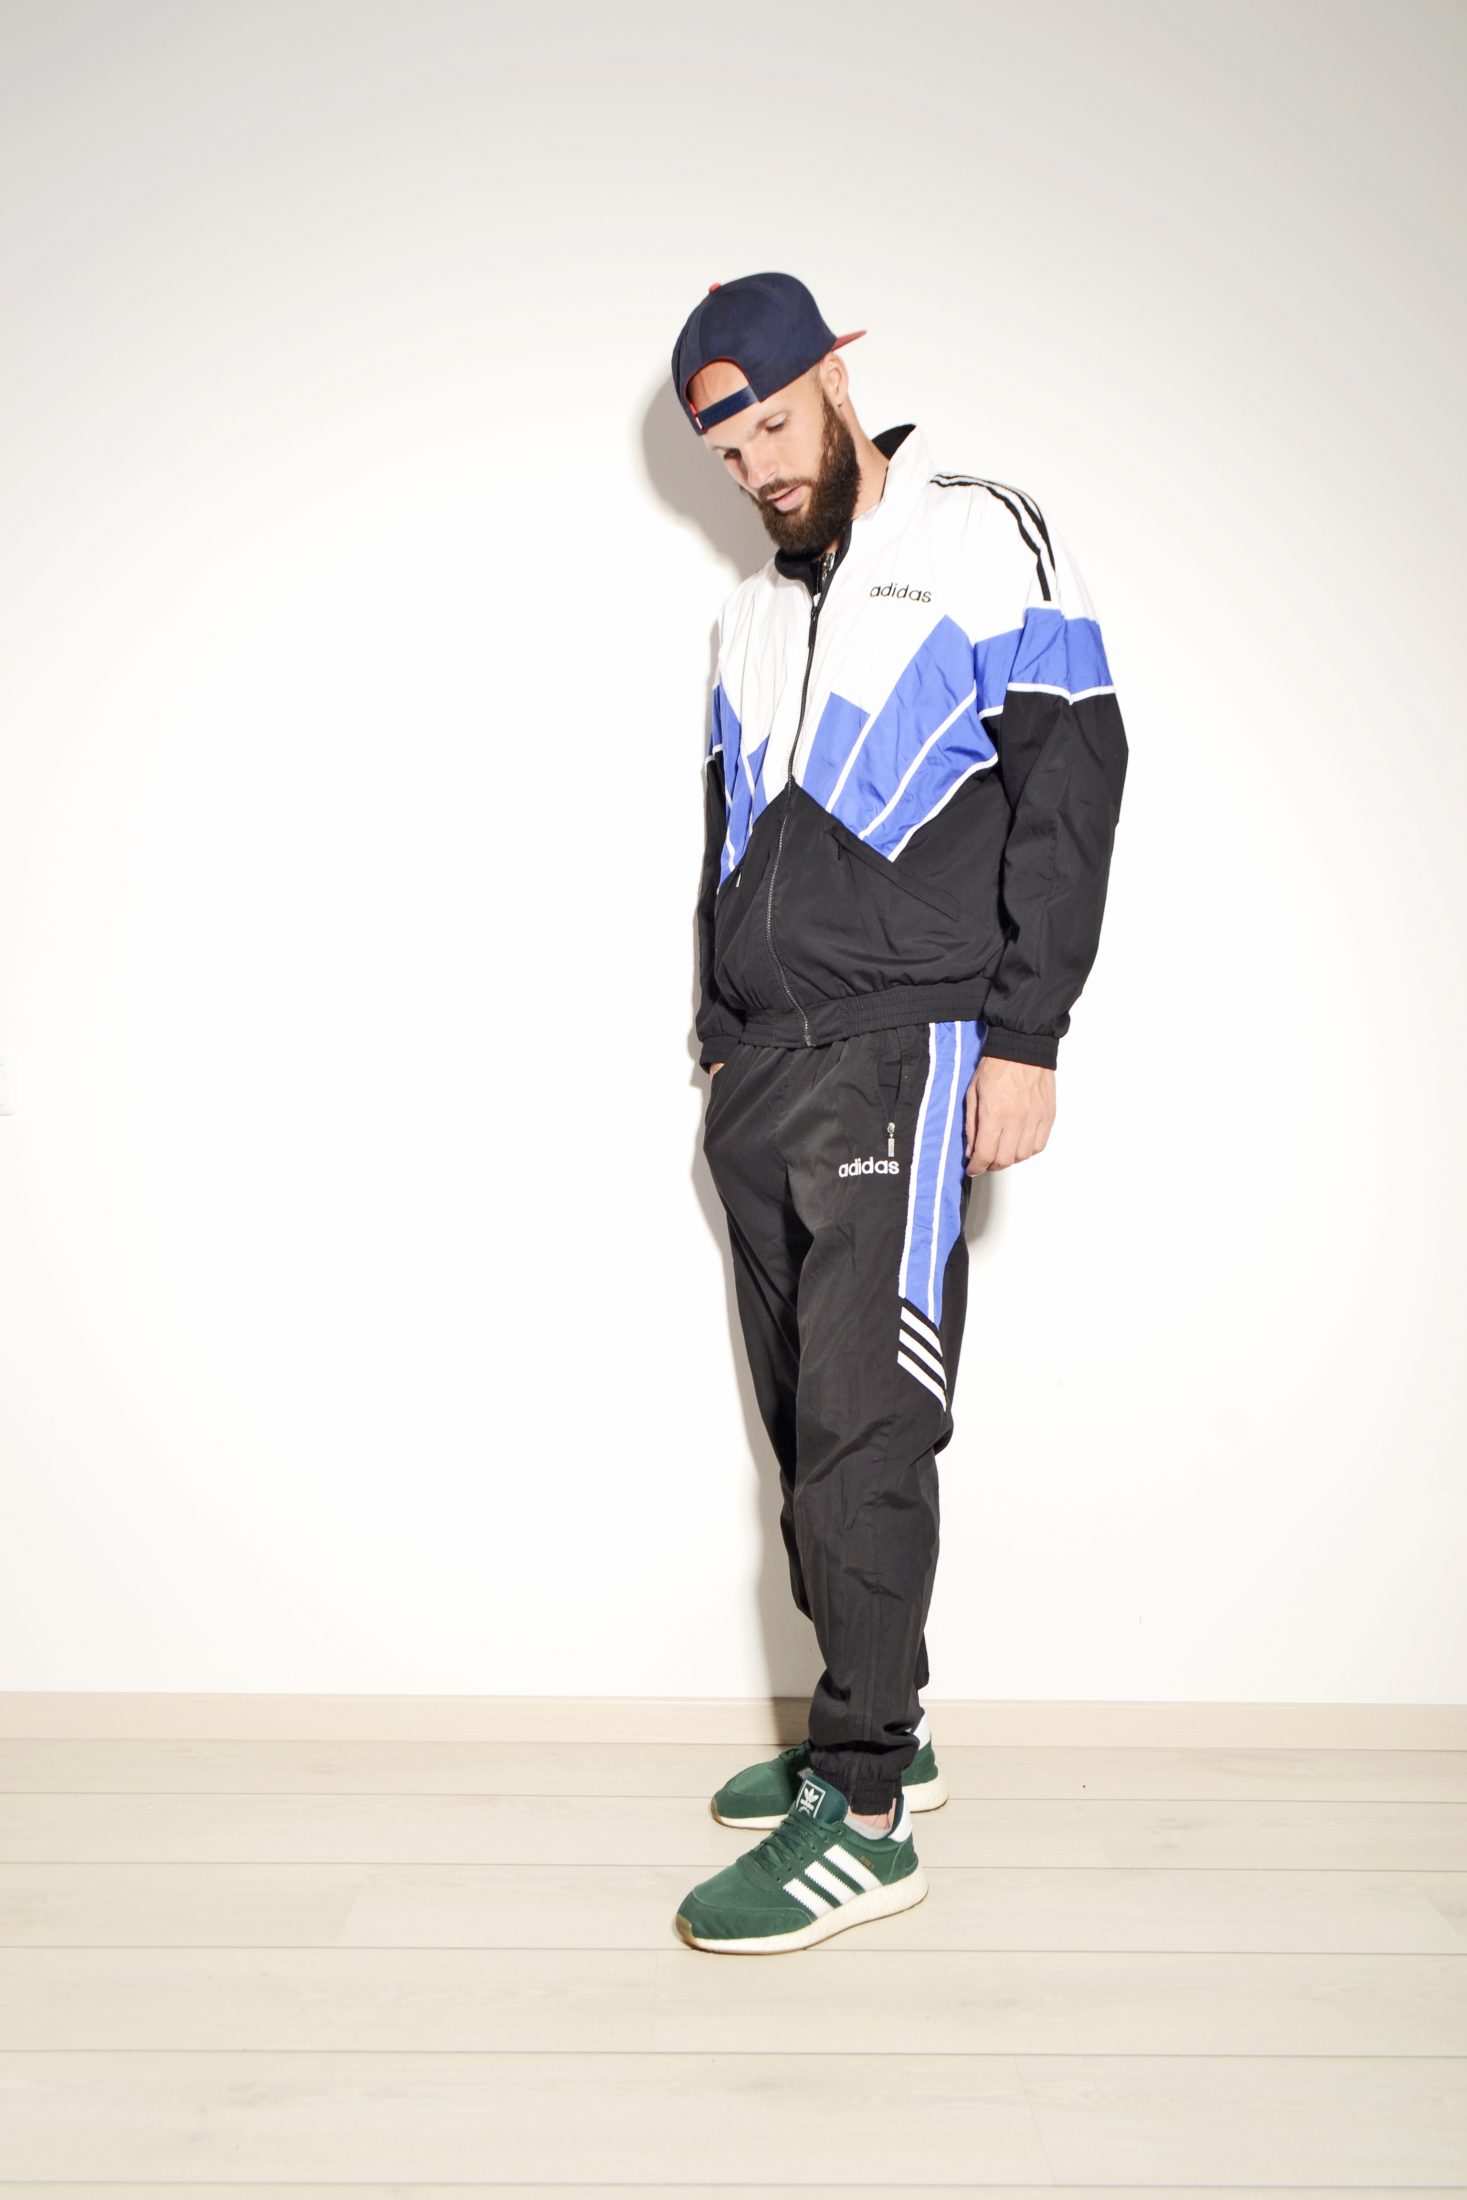 Adidas 90s vintage shell suit | HOT MILK 90's vintage clothing online